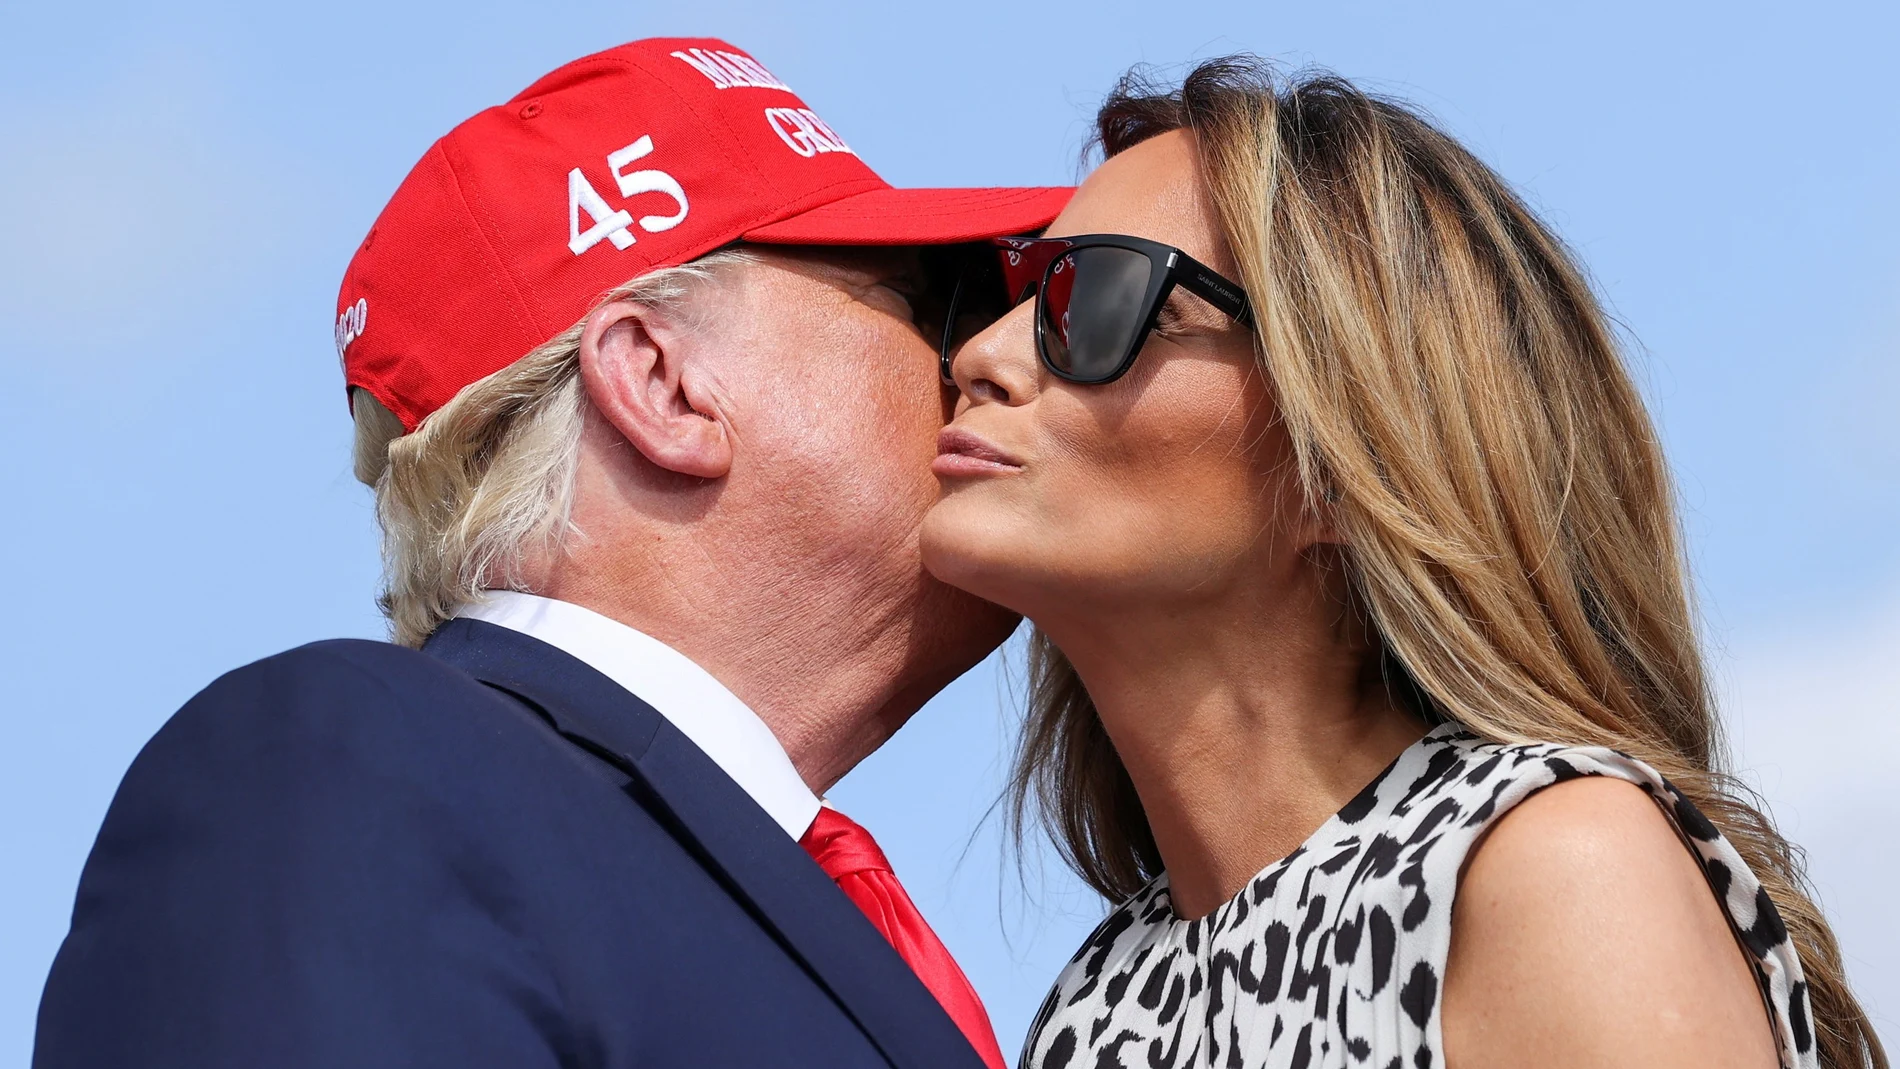 U.S. President Donald Trump kisses first lady Melania Trump ahead of a campaign rally outside Raymond James Stadium, in Tampa, Florida, U.S., October 29, 2020. REUTERS/Jonathan Ernst TPX IMAGES OF THE DAY